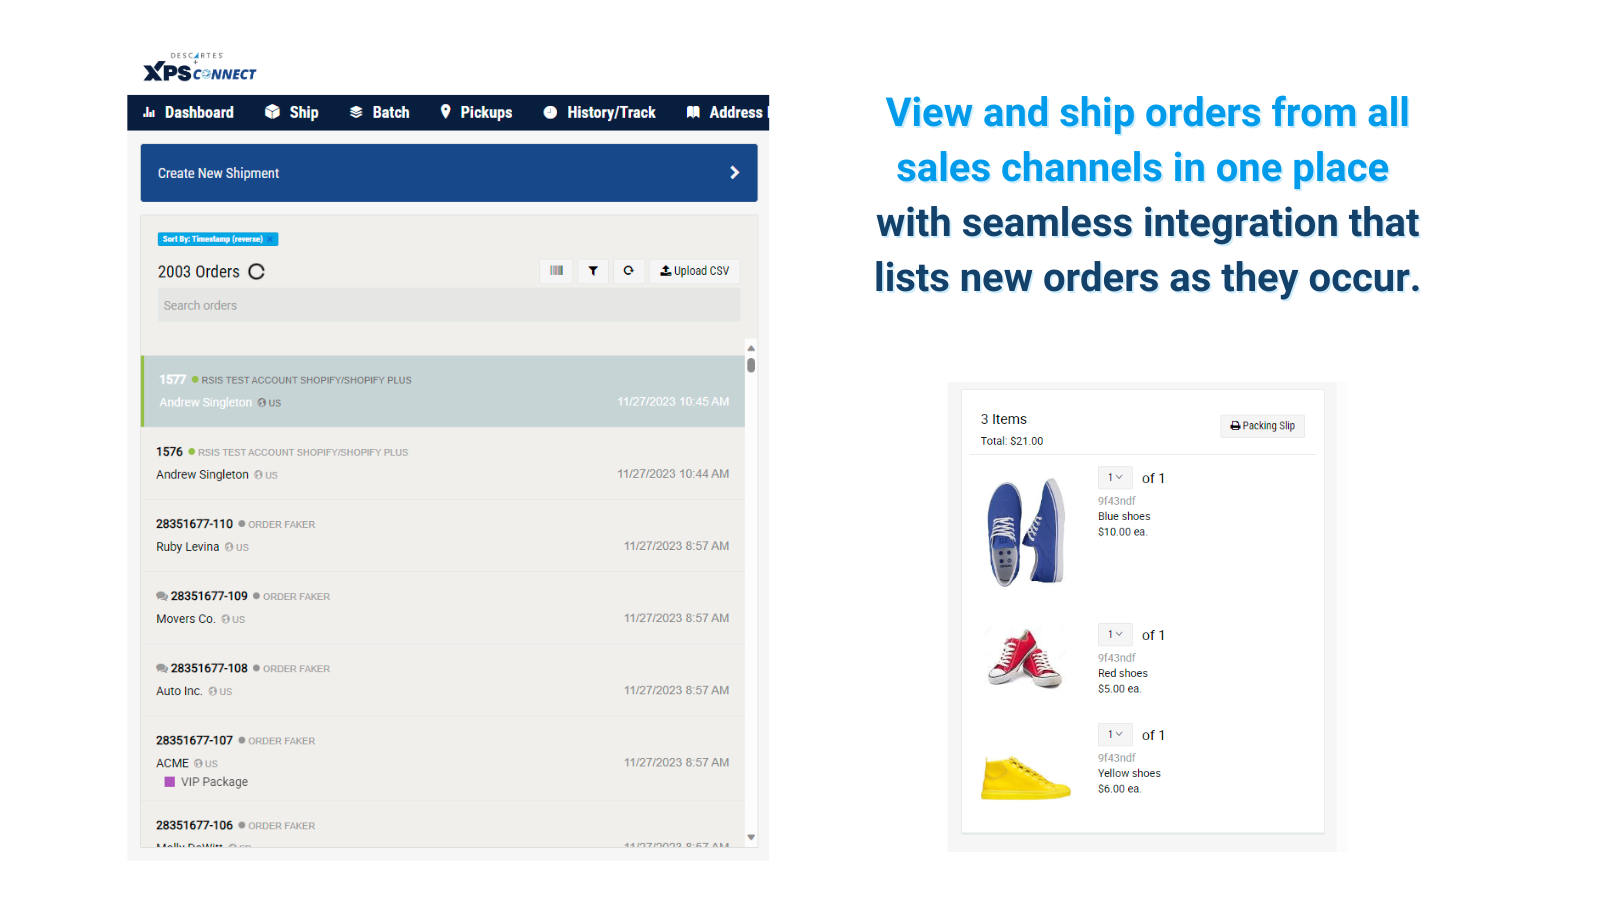 View all sales channels in one place